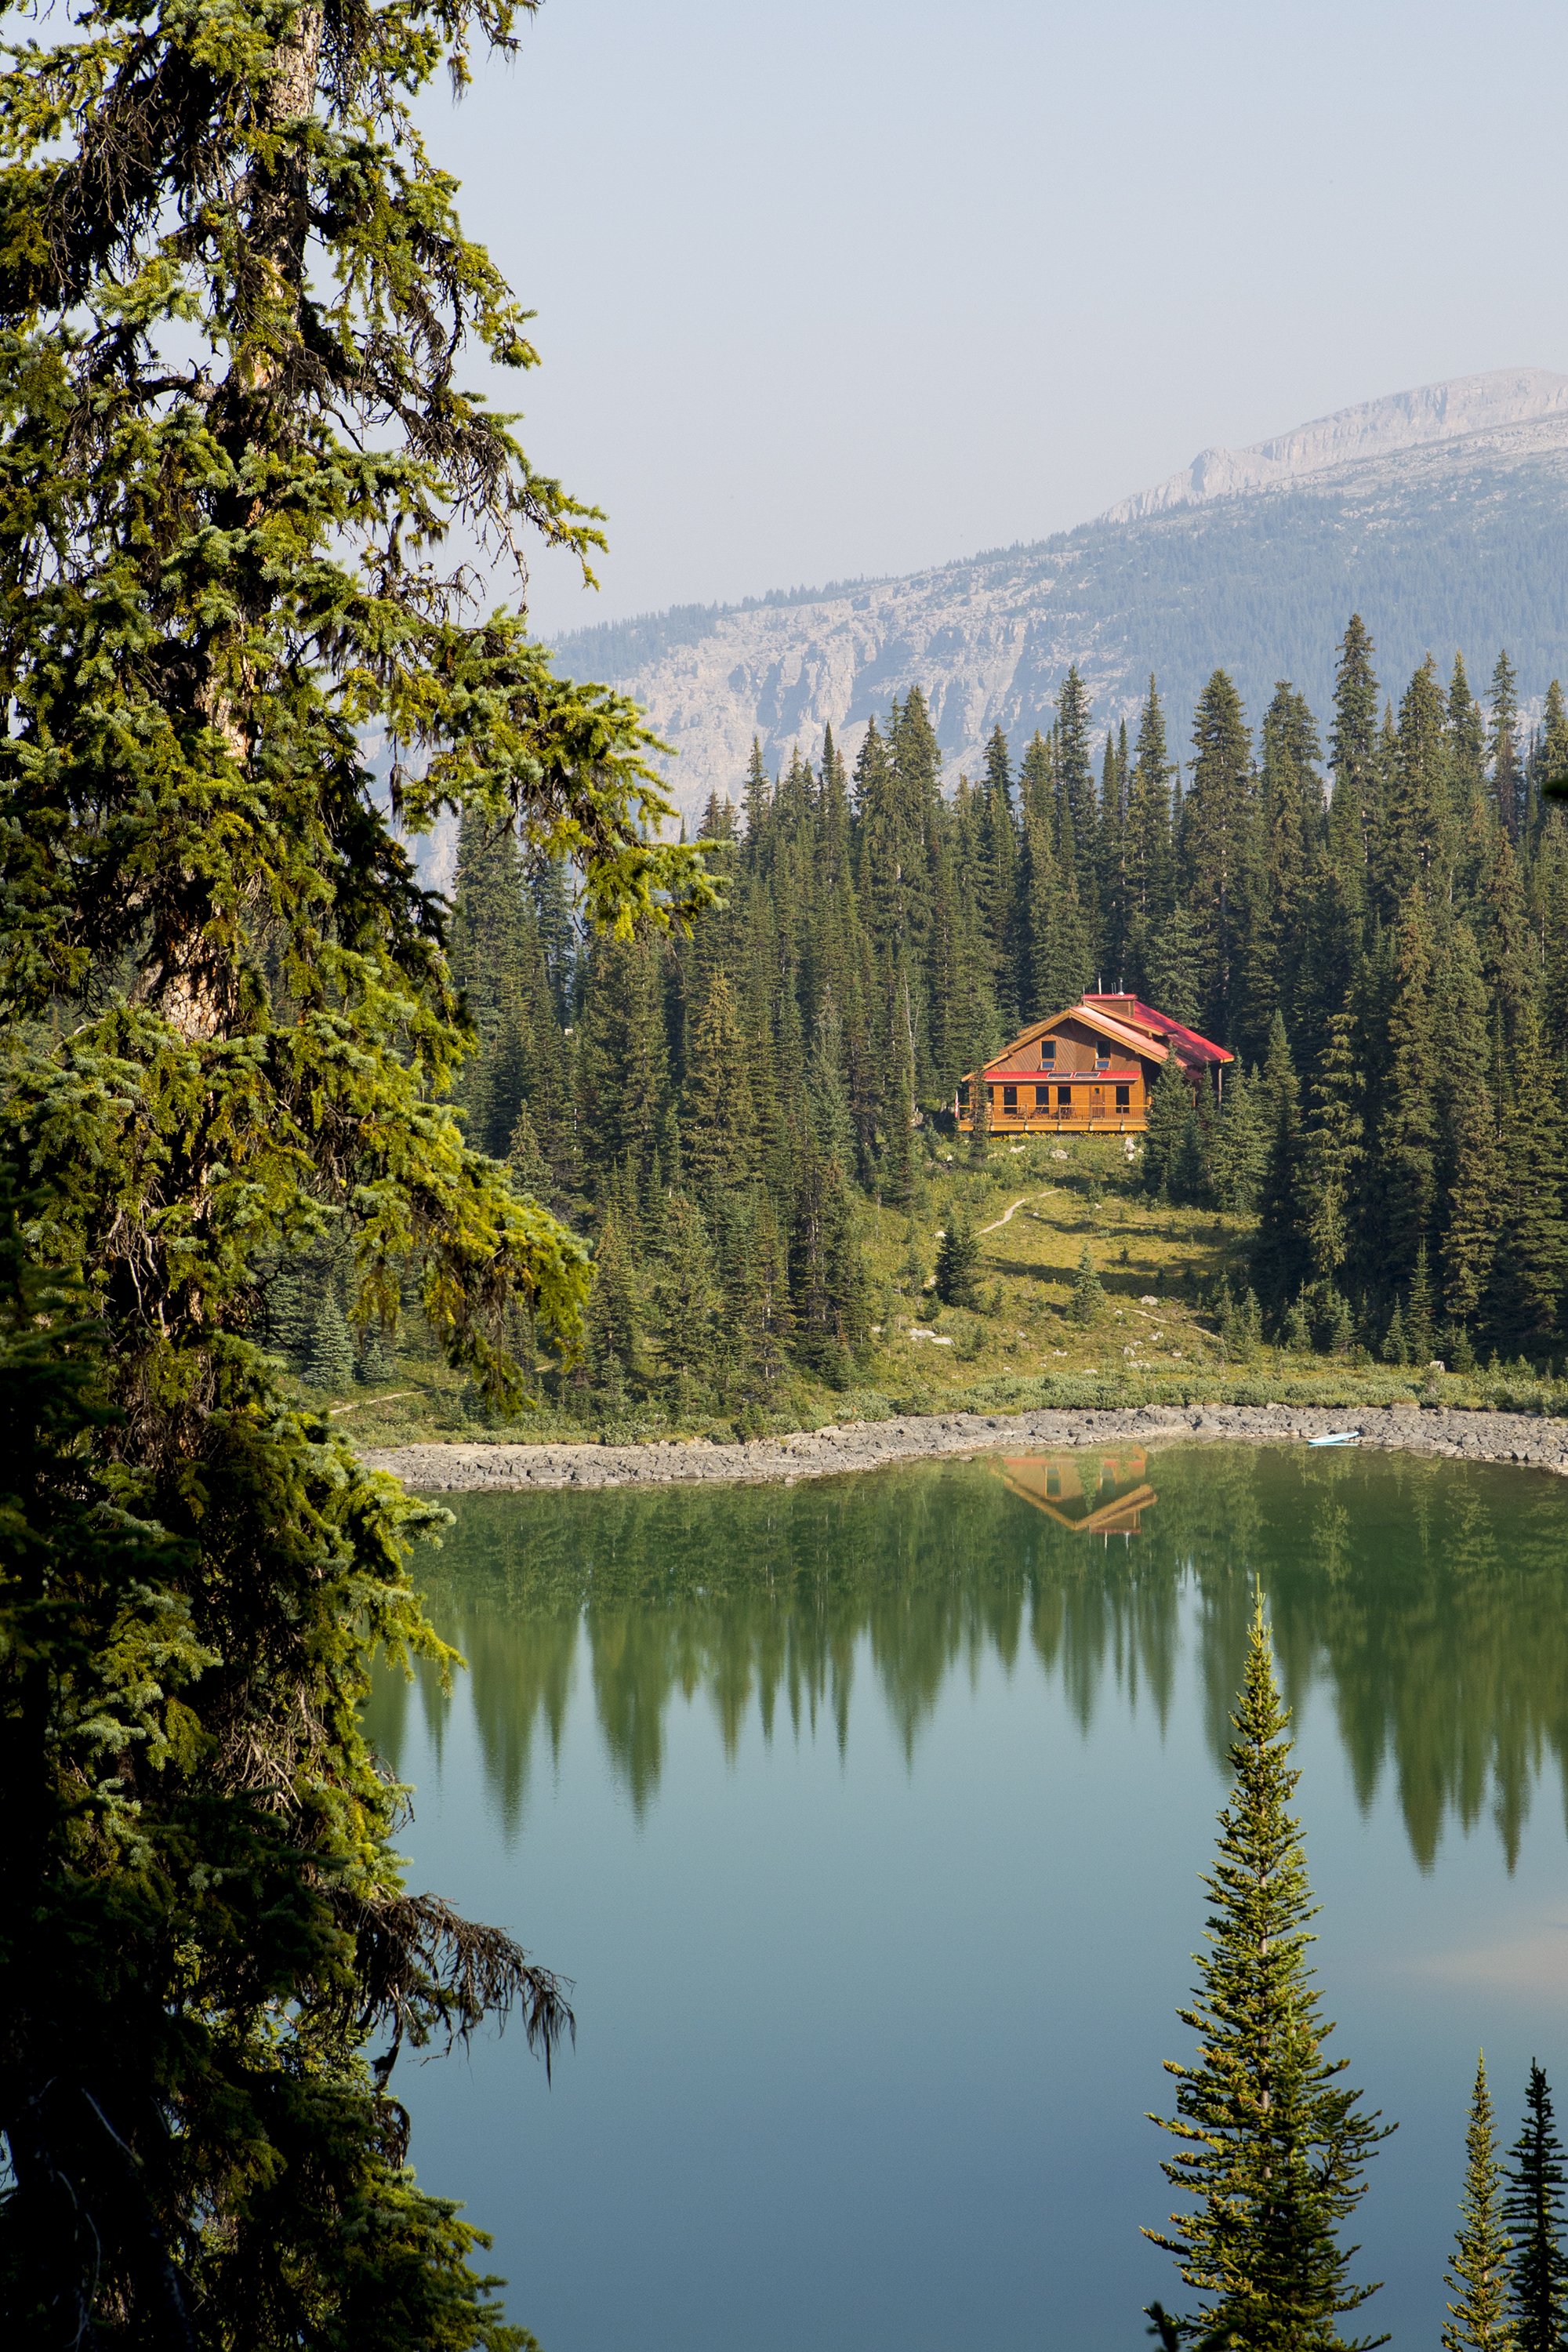  The lodge from across the lake en route up to Mista Vista. Photo by Abbydell Photography. 